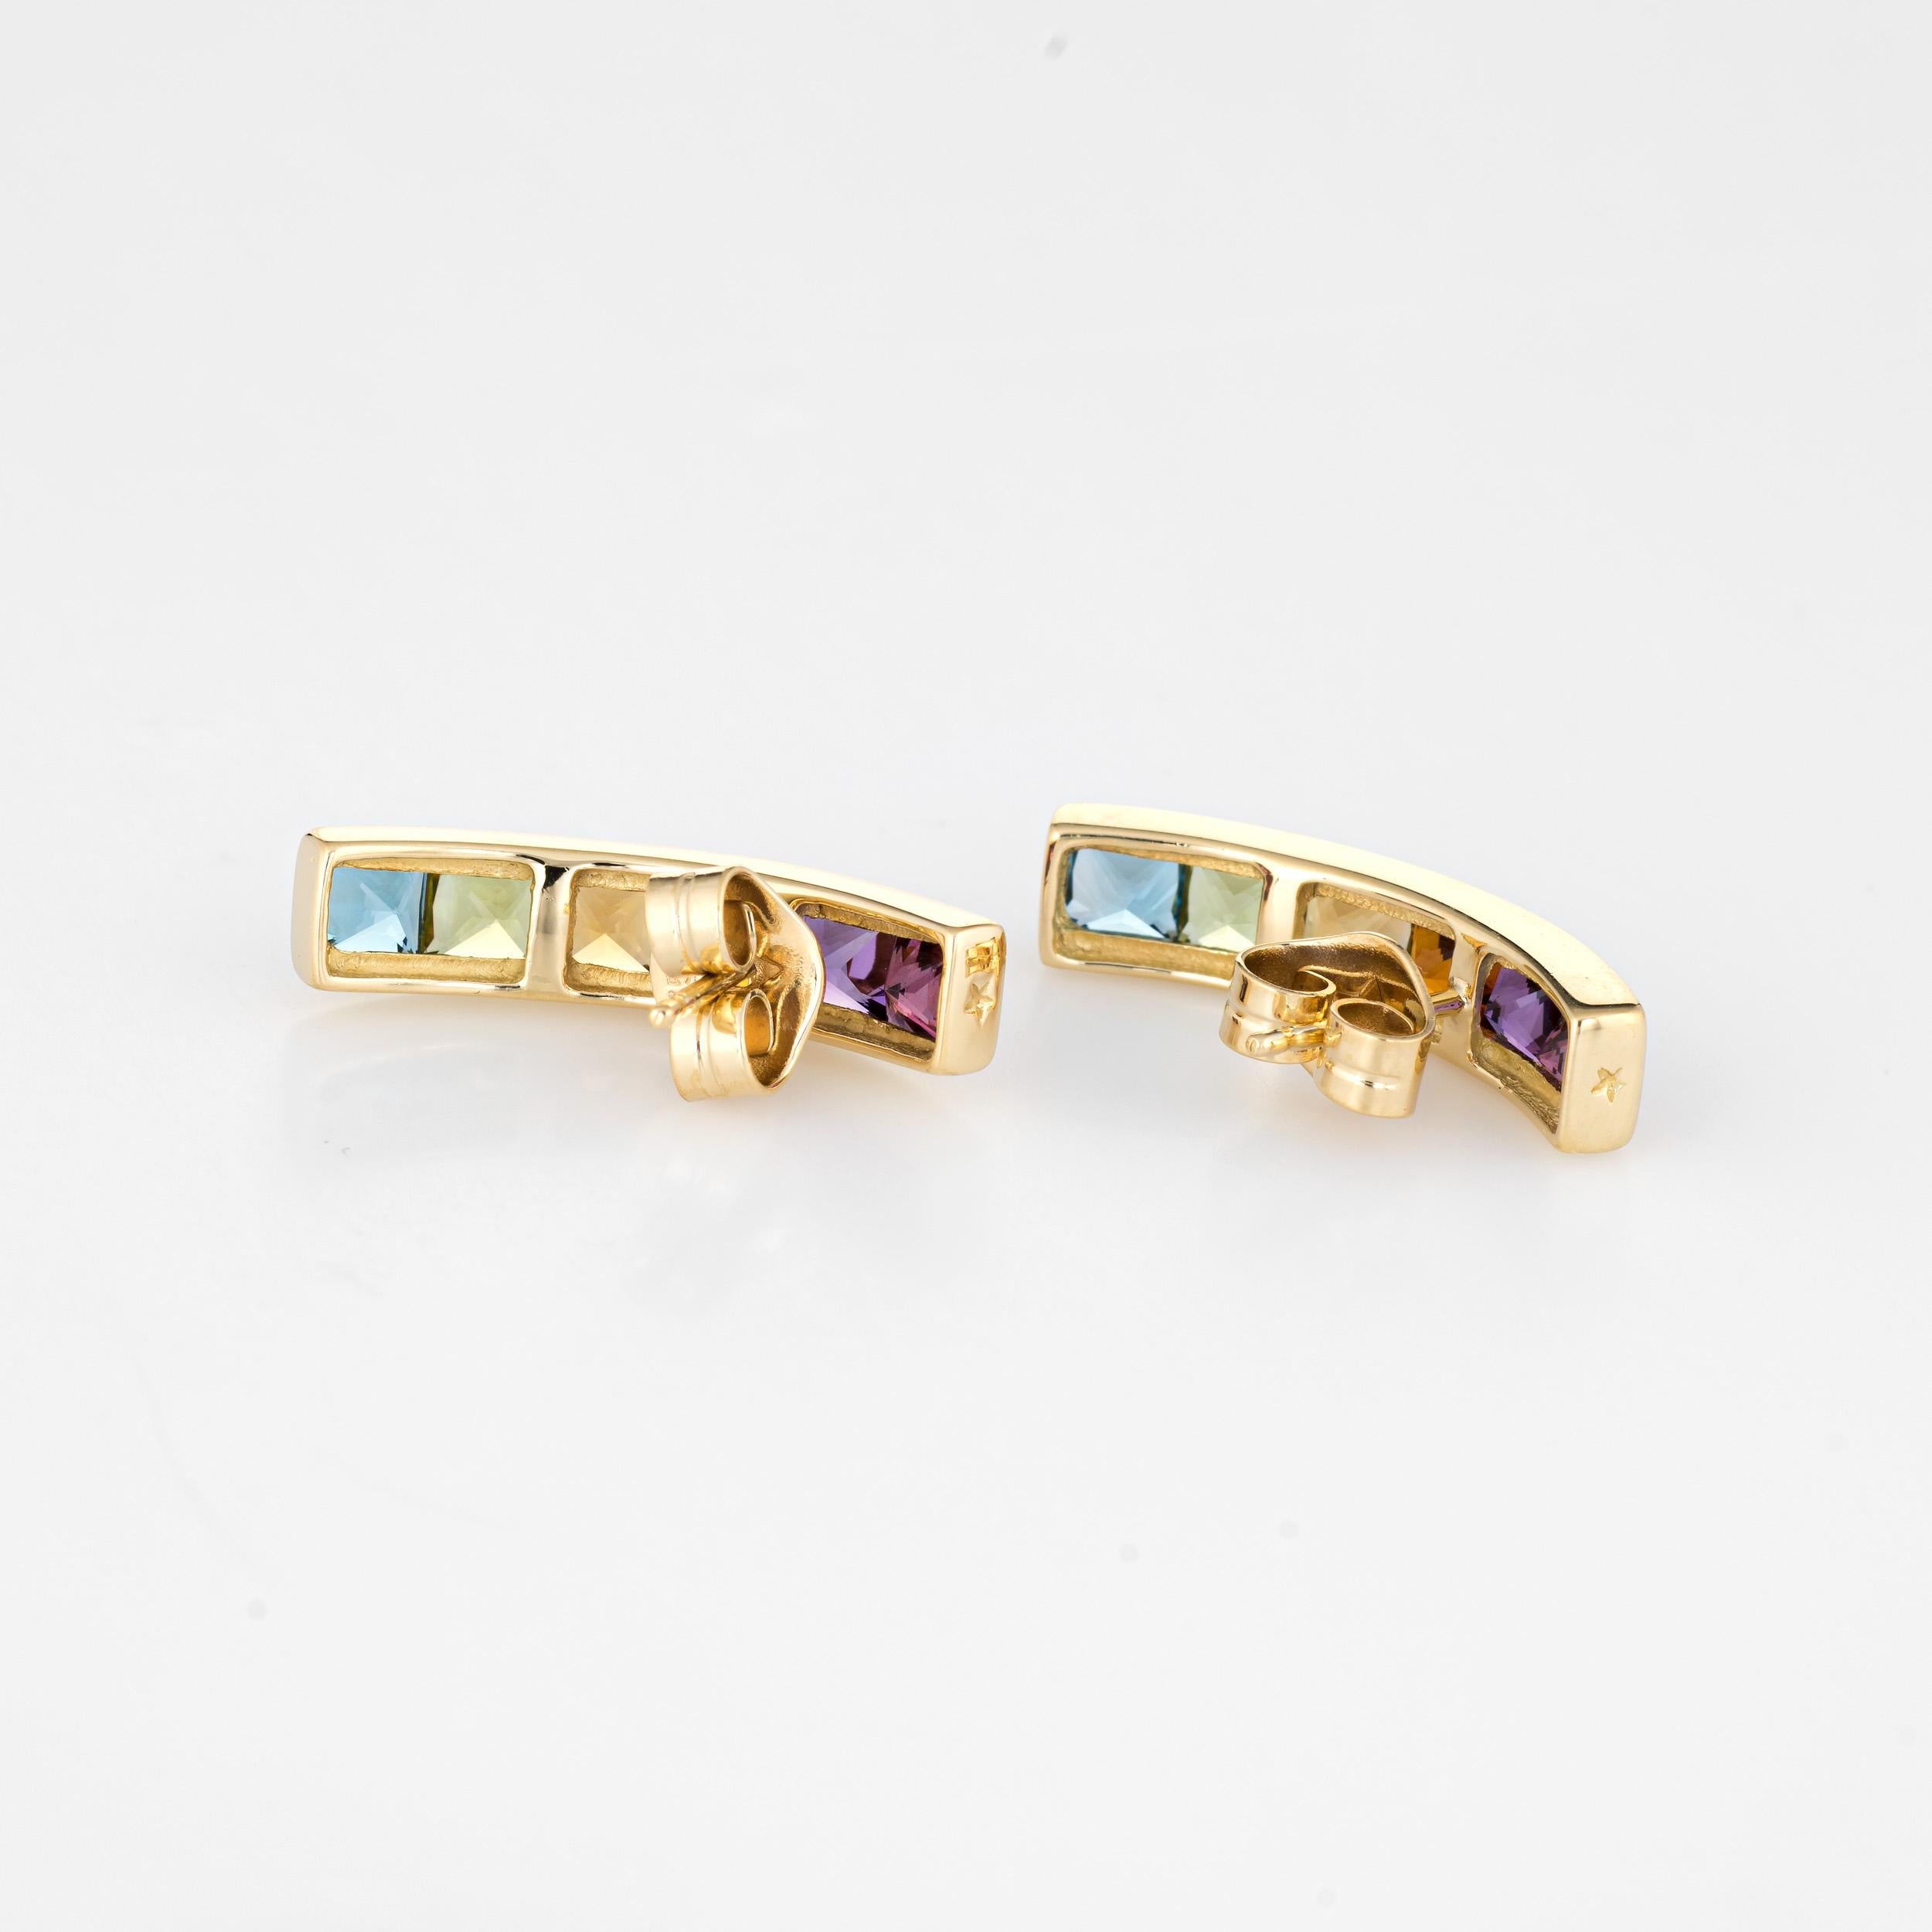 Elegant pair of estate H Stern rainbow gemstone earrings crafted in 18k yellow gold. 

Princess cut pink tourmaline, amethyst, citrine, peridot and blue topaz are estimated at 0.10 carats each. The total weight is estimated at 1.20 carats. The